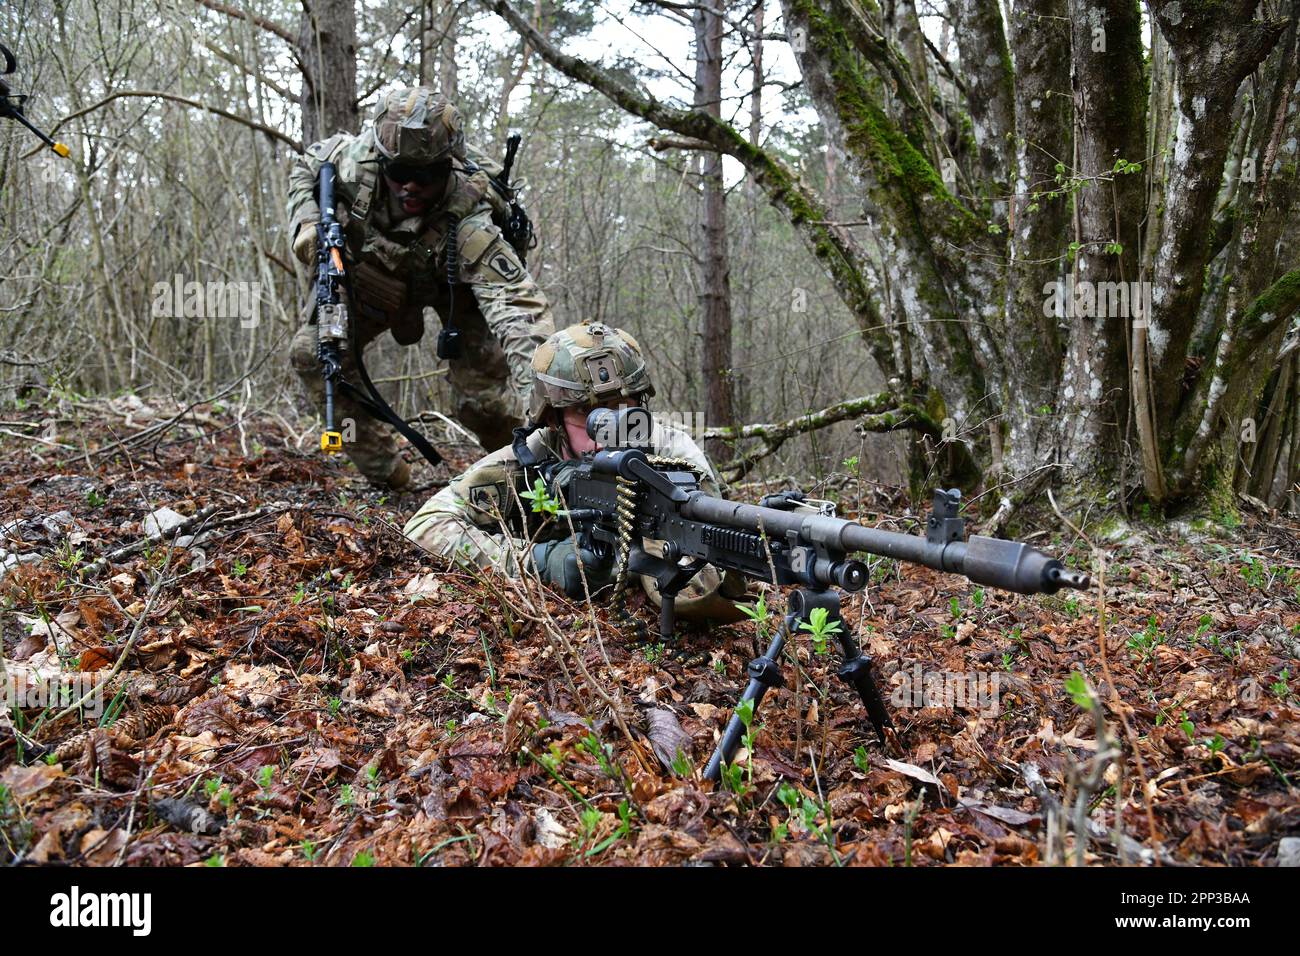 U. S. Army Paratroopers assigned to Castle Company, 54th Brigade Engineer Battalion, 173rd Airborne Brigade, engage a target during team blank-fire and tactical movement training at Pocek Range in Postonja, Slovenia, Apr. 20, 2023. The 173rd Airborne Brigade is the U.S. Army Contingency Response Force in Europe, capable of projecting ready forces anywhere in the U.S. European, Africa or Central Commands' areas of responsibility. (U.S. Army Photo by Paolo Bovo) Stock Photo